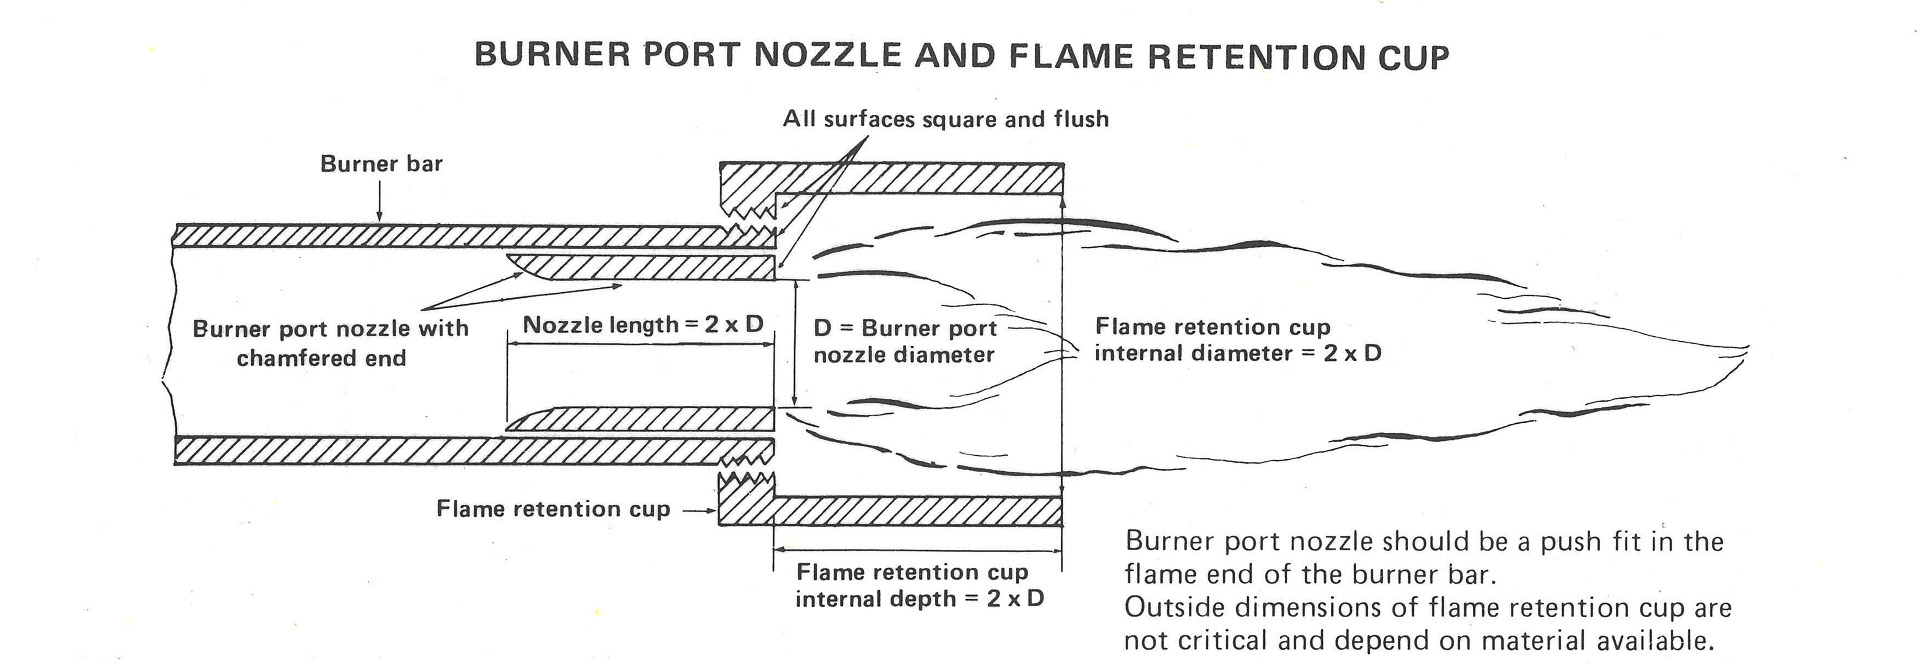 Burner port nozzle and flame retention cup